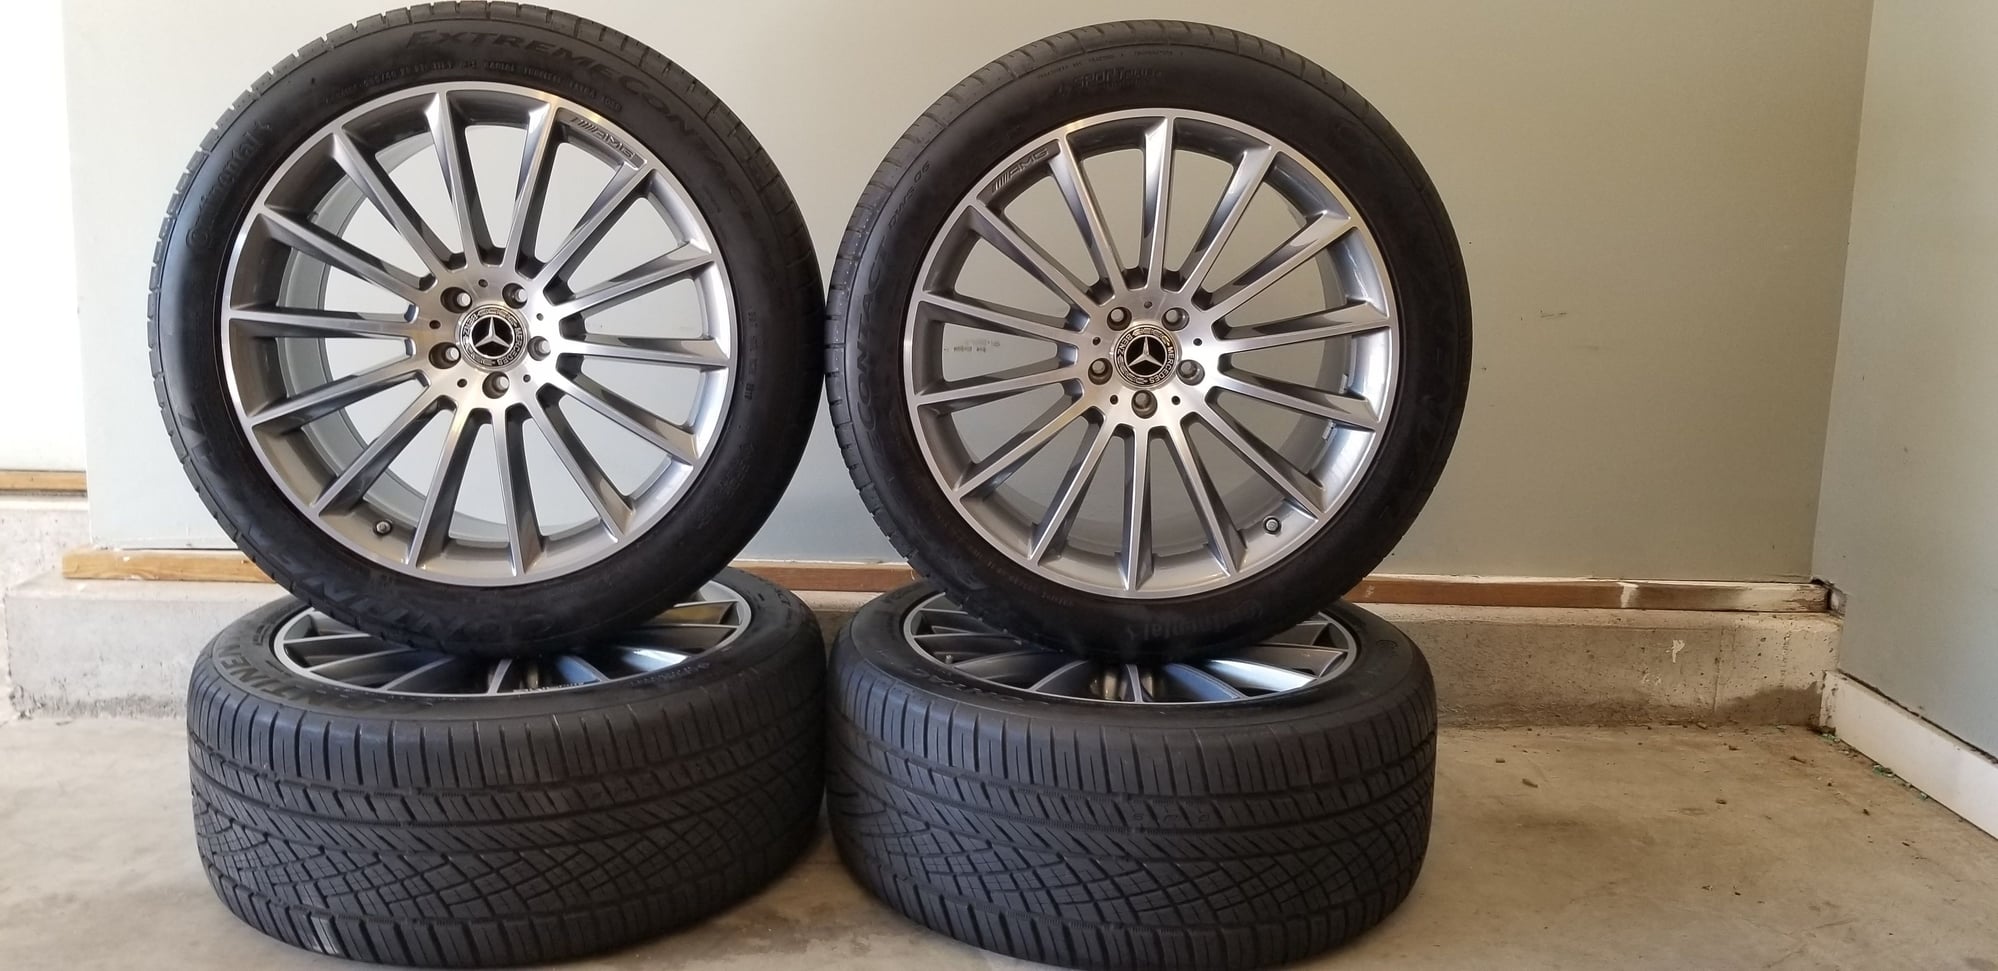 Wheels and Tires/Axles - FS: (4) OEM 2018 ML GL AMG 21" Wheels and Continental All Season Tires. - New - Springfield, MA 1089, United States